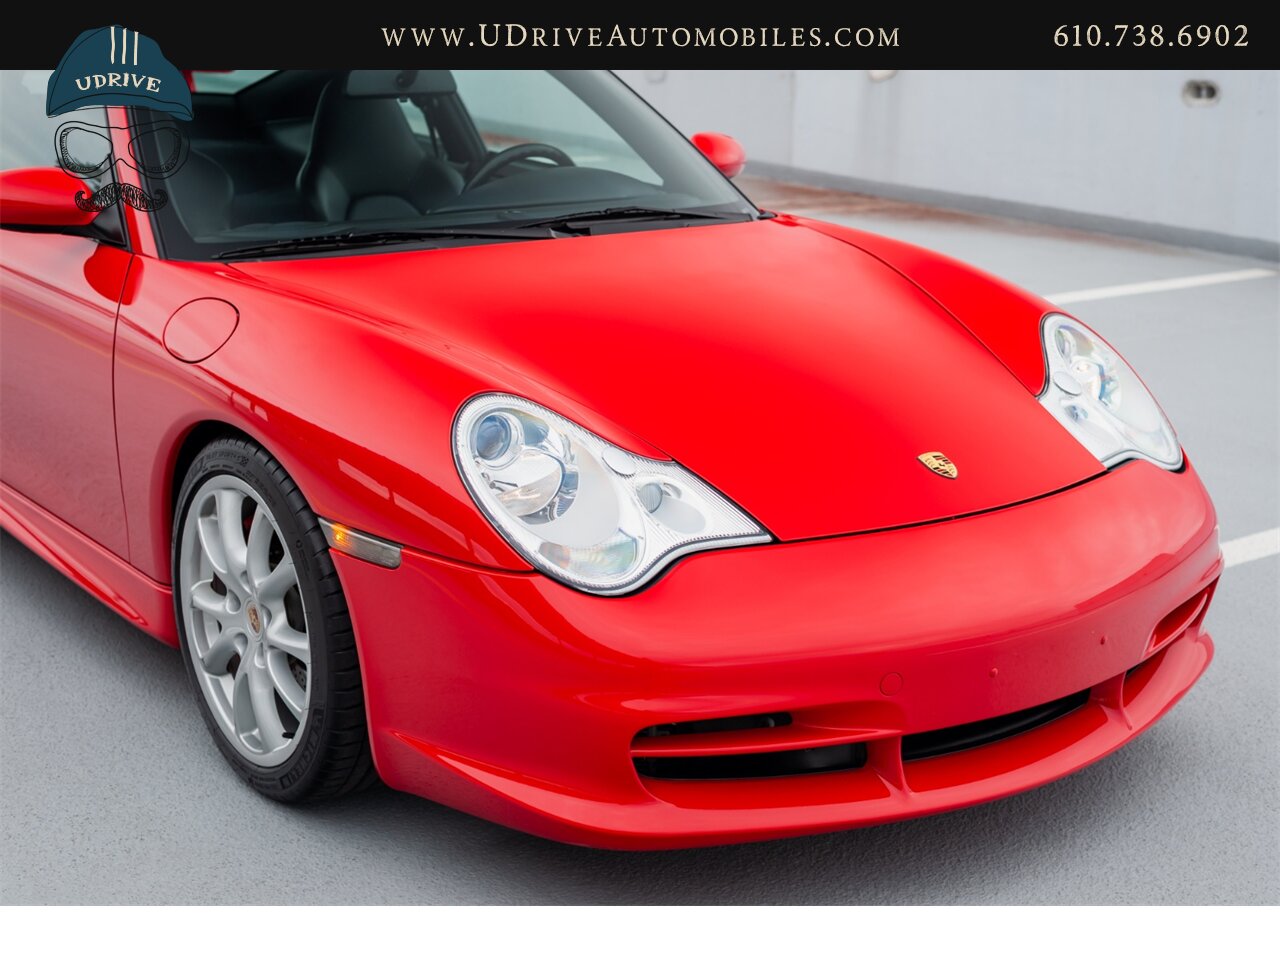 2004 Porsche 911 996 GT3 Guards Red Sport Seats Painted Hardbacks  Painted Center Console 18k Miles - Photo 16 - West Chester, PA 19382